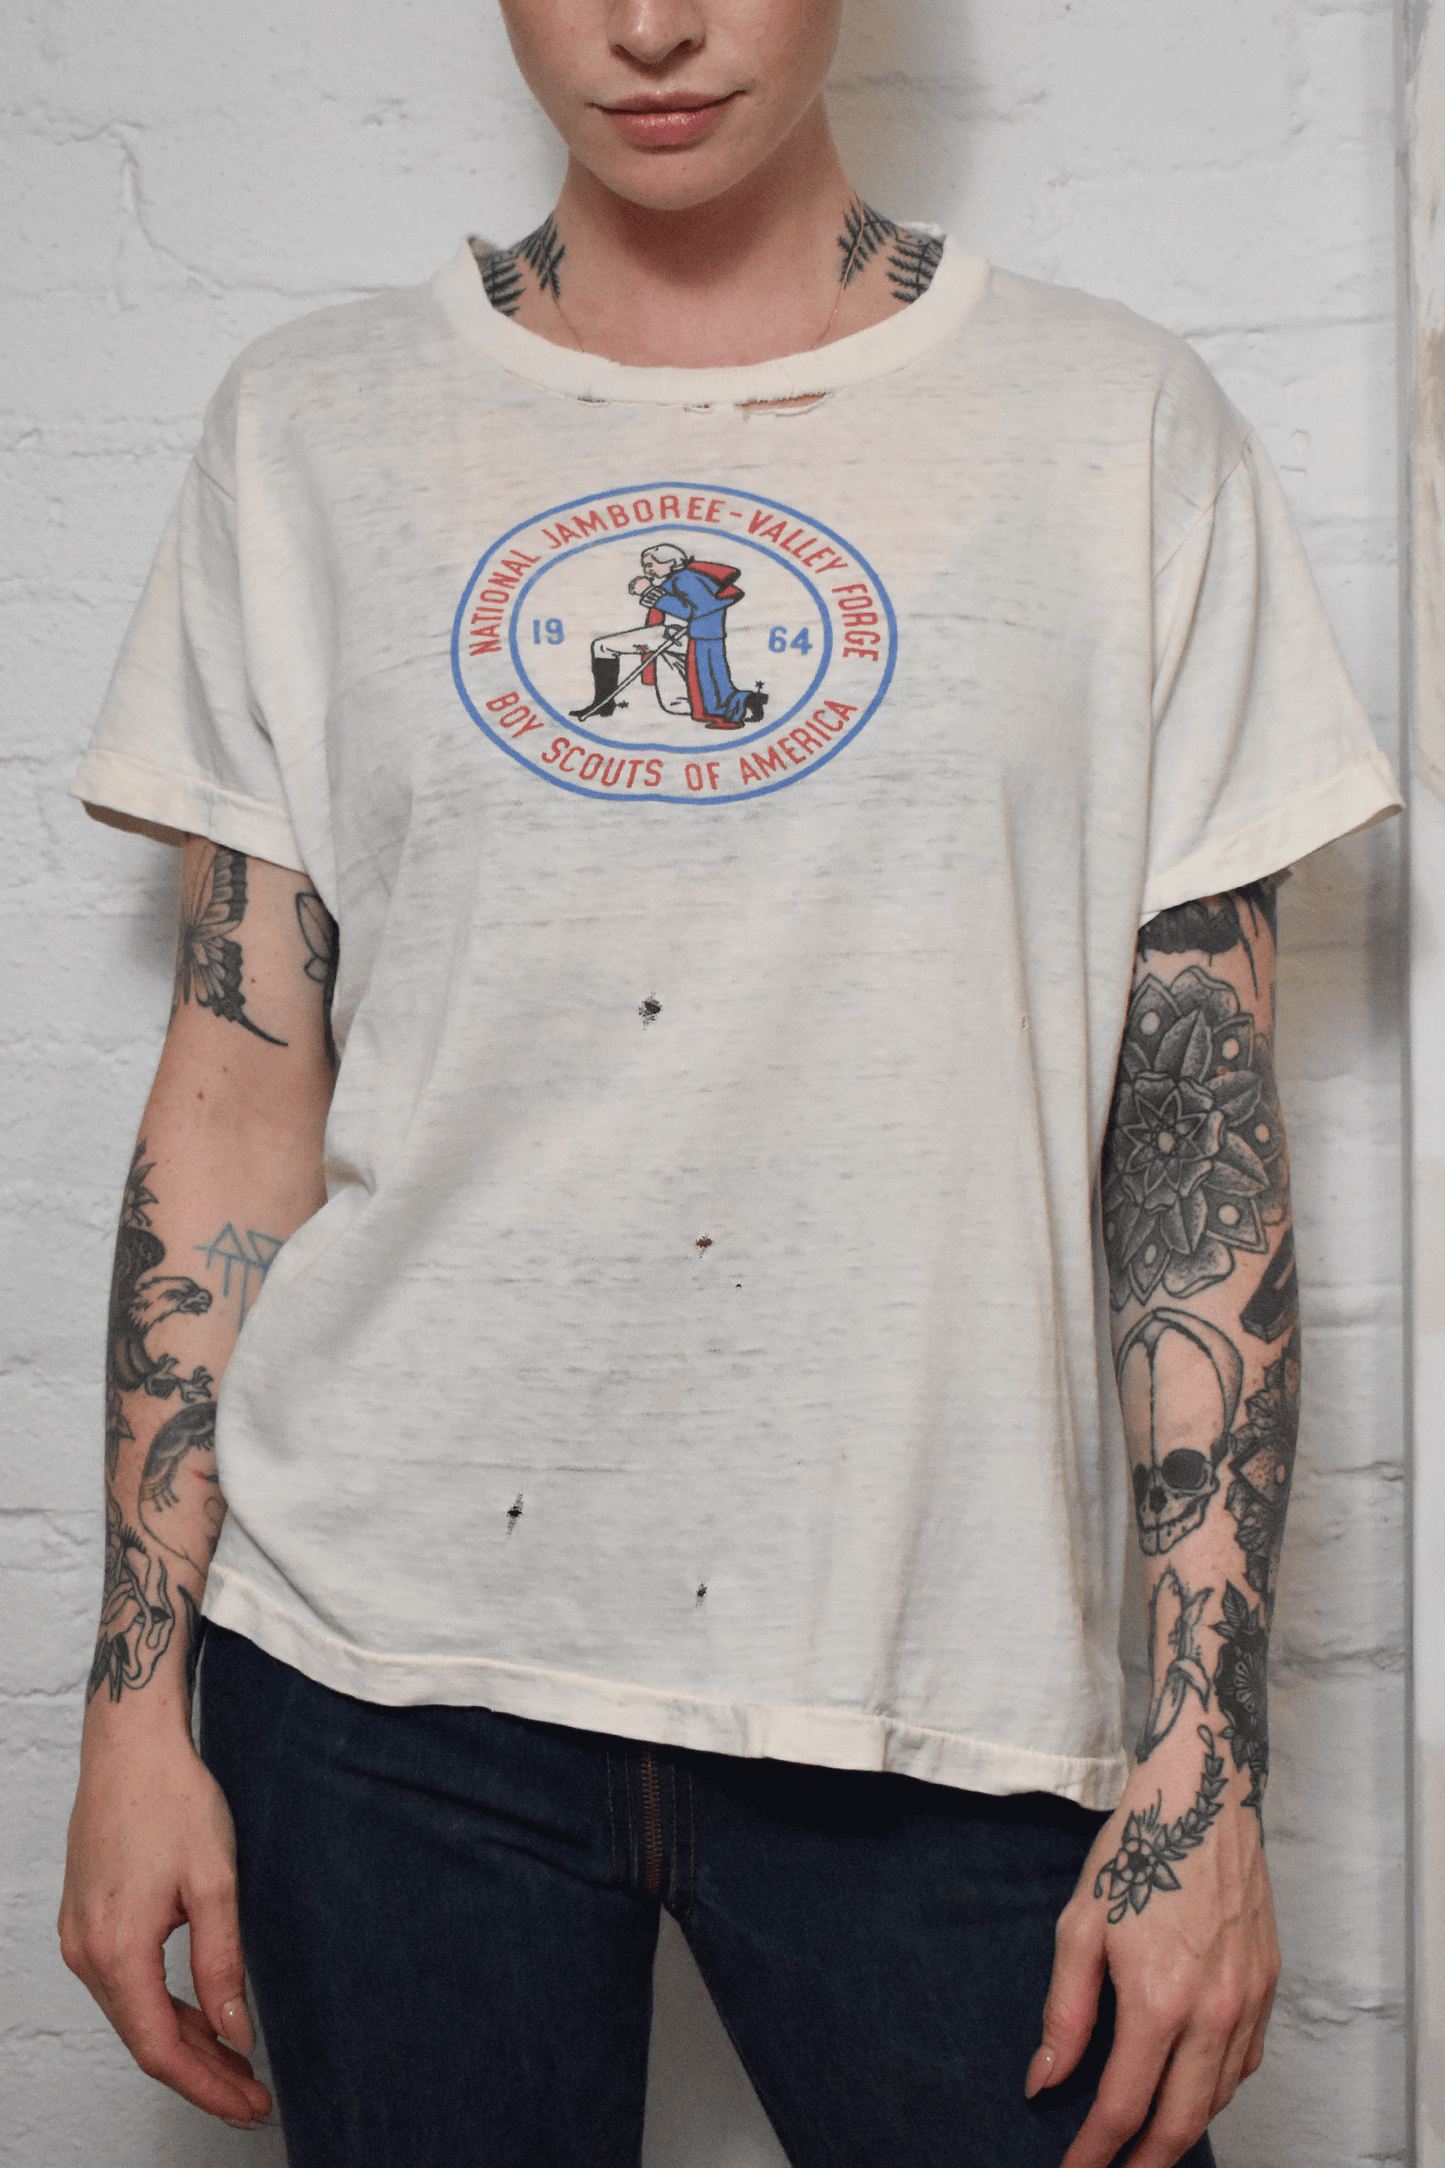 Vintage 1960s Trashed "National Jamboree Valley Forge Boy Scouts of America" T-shirt